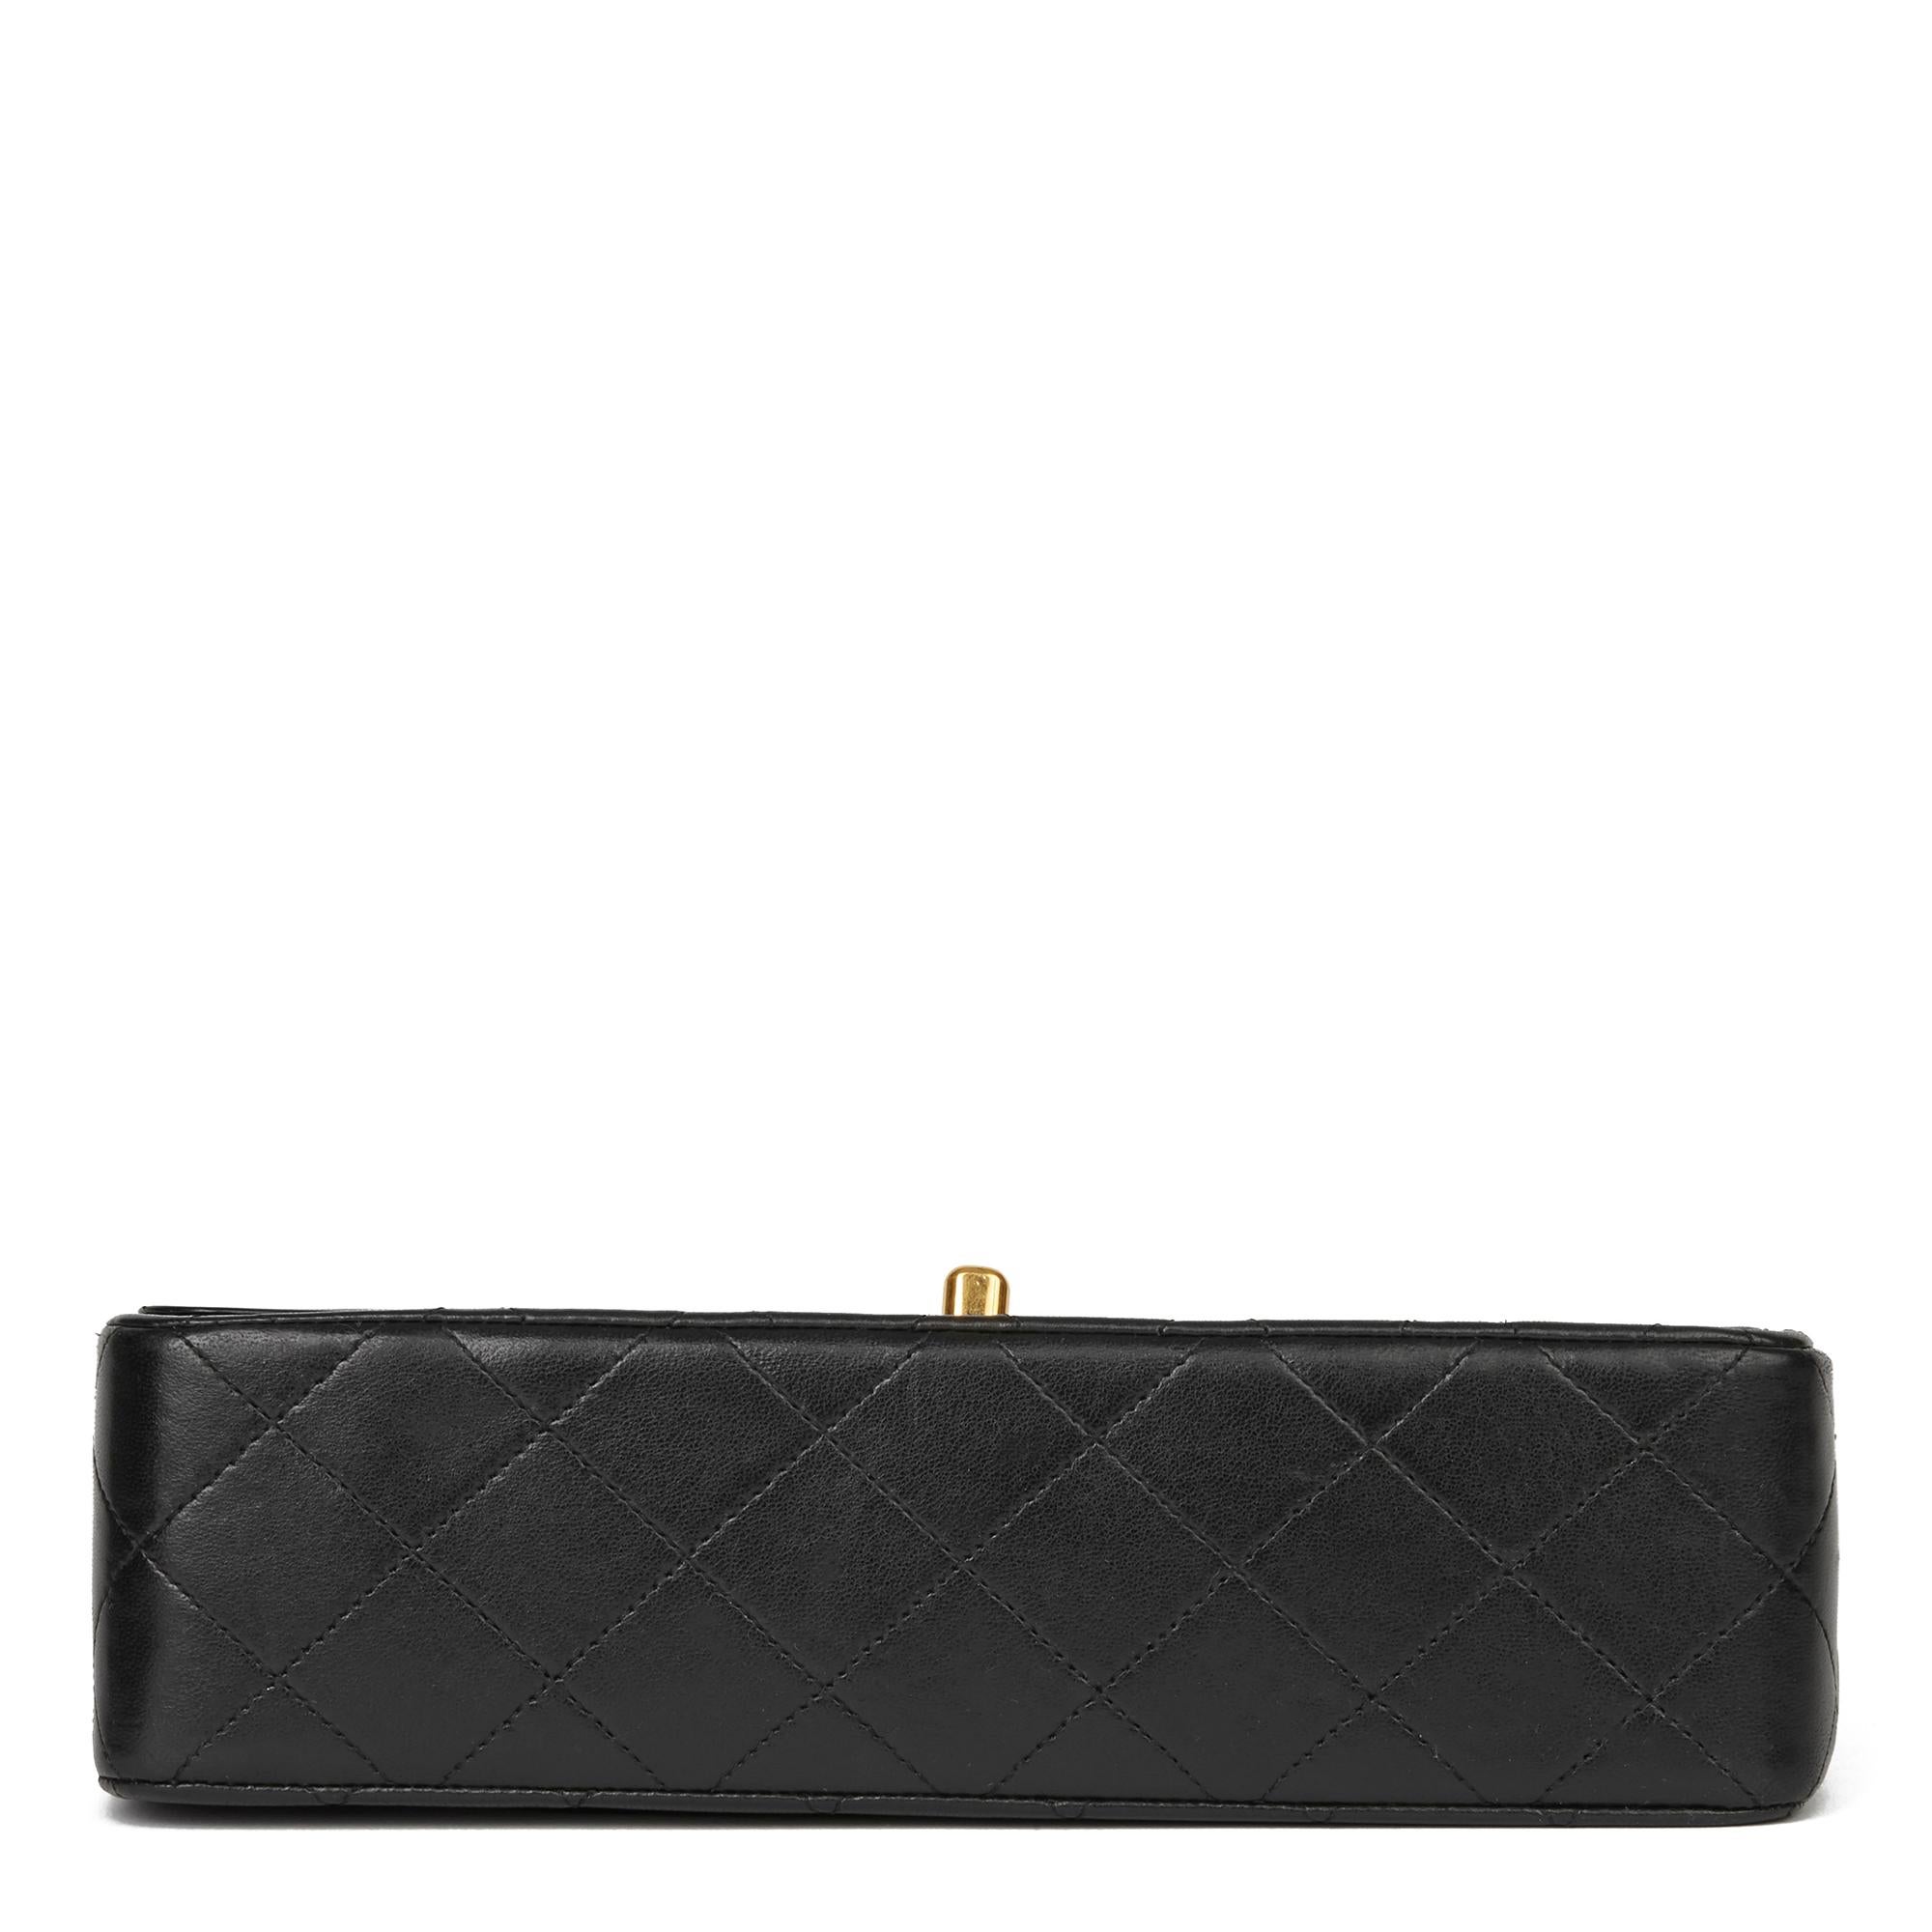 1991 Chanel Black Quilted Lambskin Vintage Small Classic Double Flap Bag 1